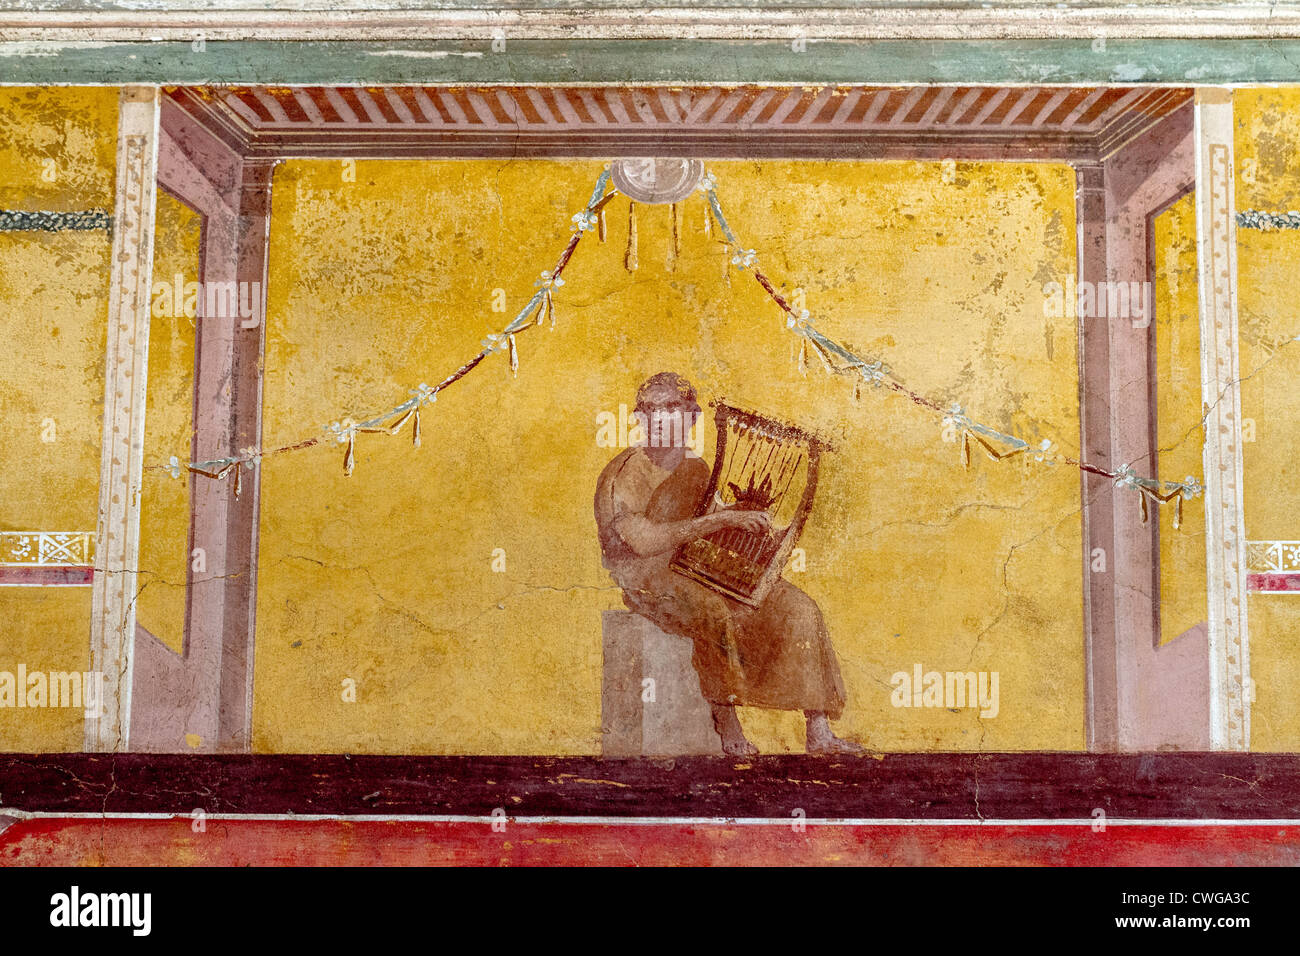 Frescos at the Villa di Poppaea at the Roman site of Oplontis, an aristocratic resort.  This shows a lyre player. Stock Photo